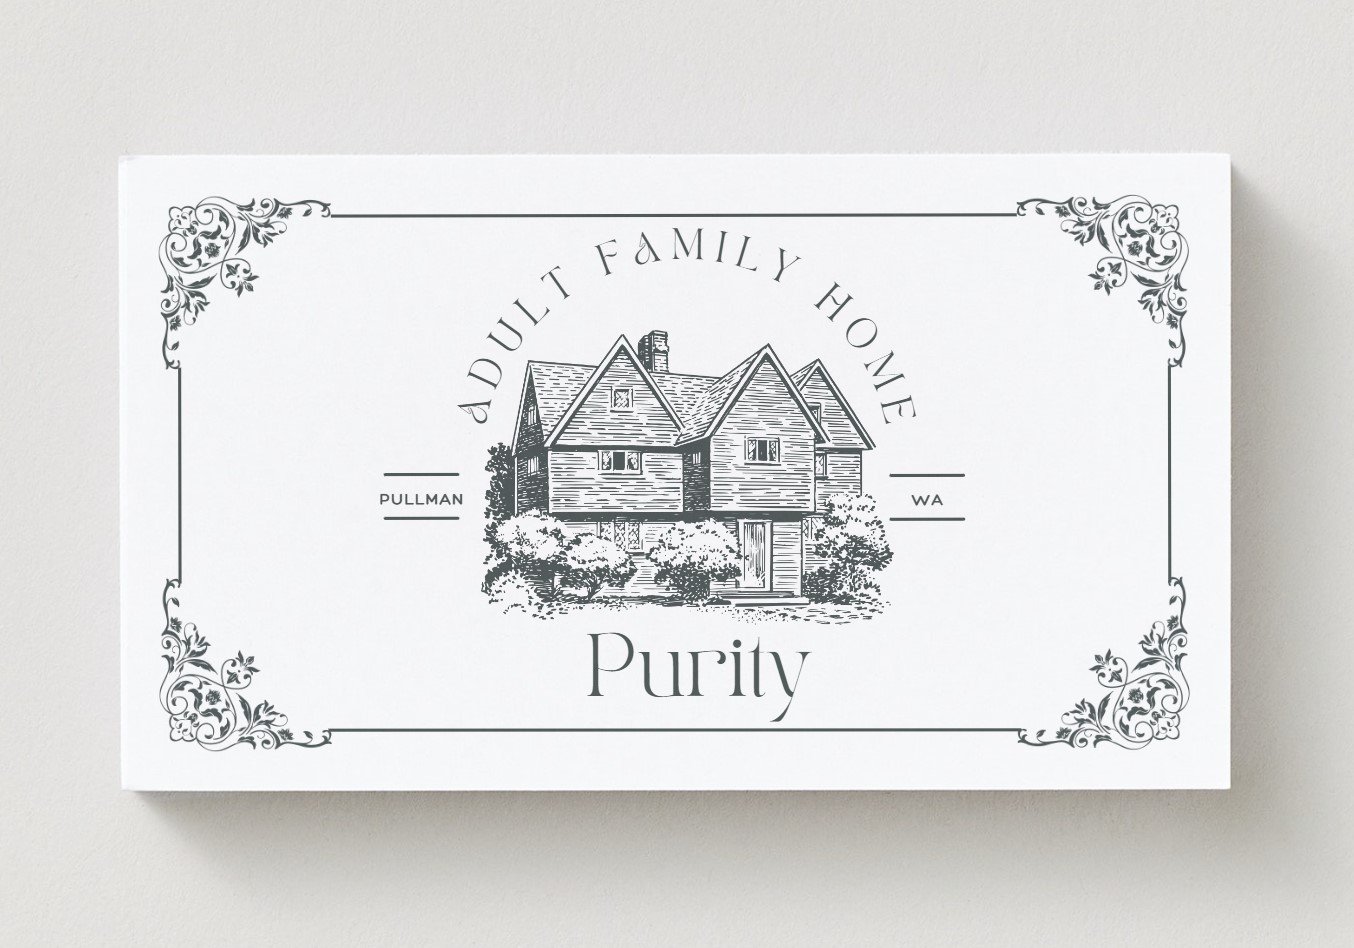 22110701 - Purity AFH Business Cards - Pullman - Front.jpg